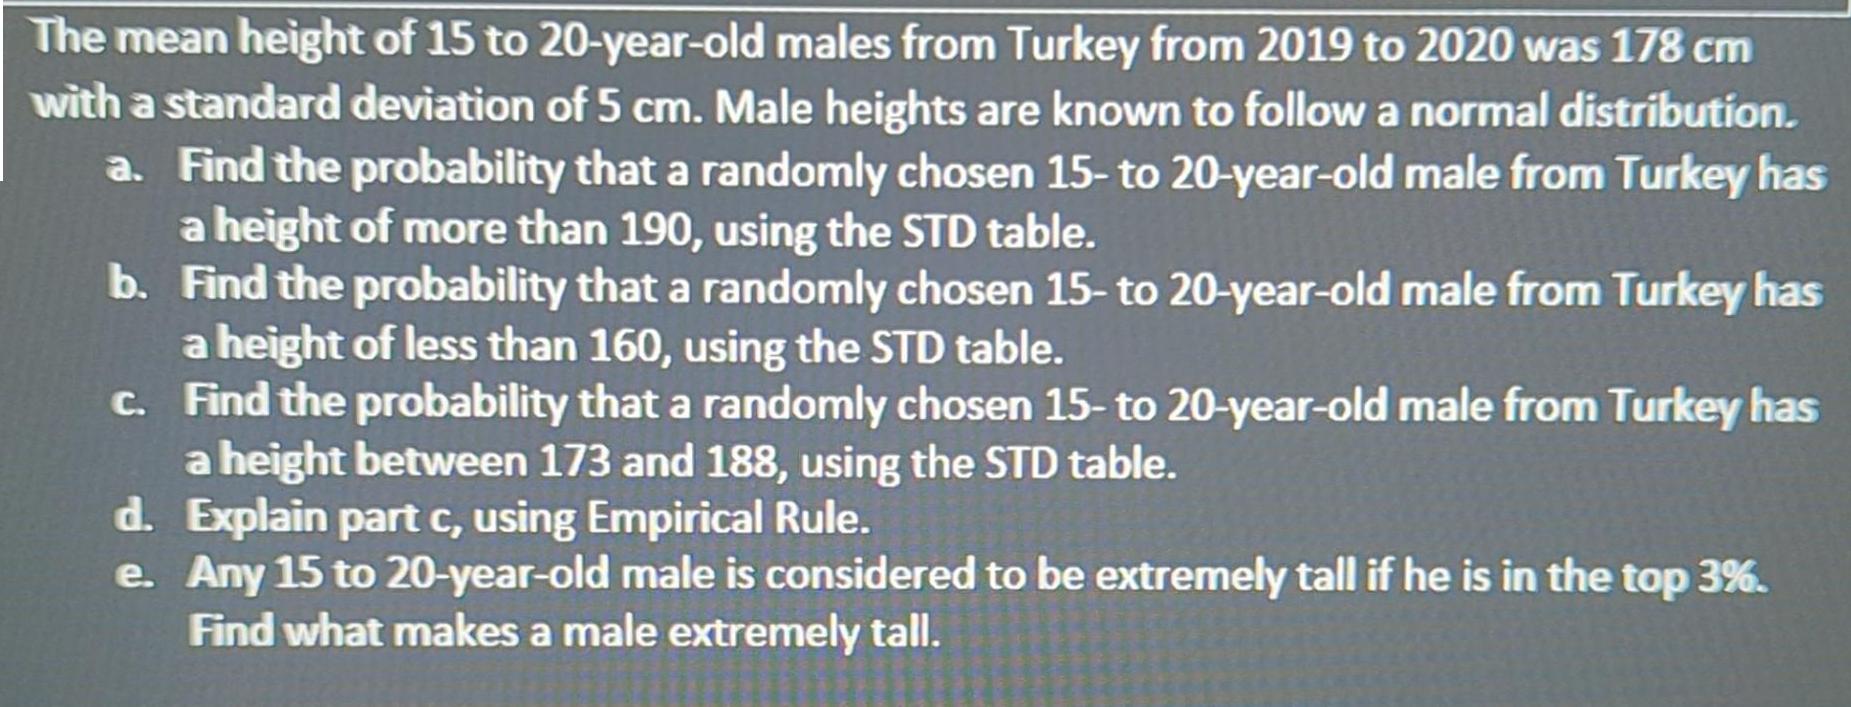 The mean height of 15 to 20-year-old males from Turkey from 2019 to 2020 was 178 cm with a standard deviation